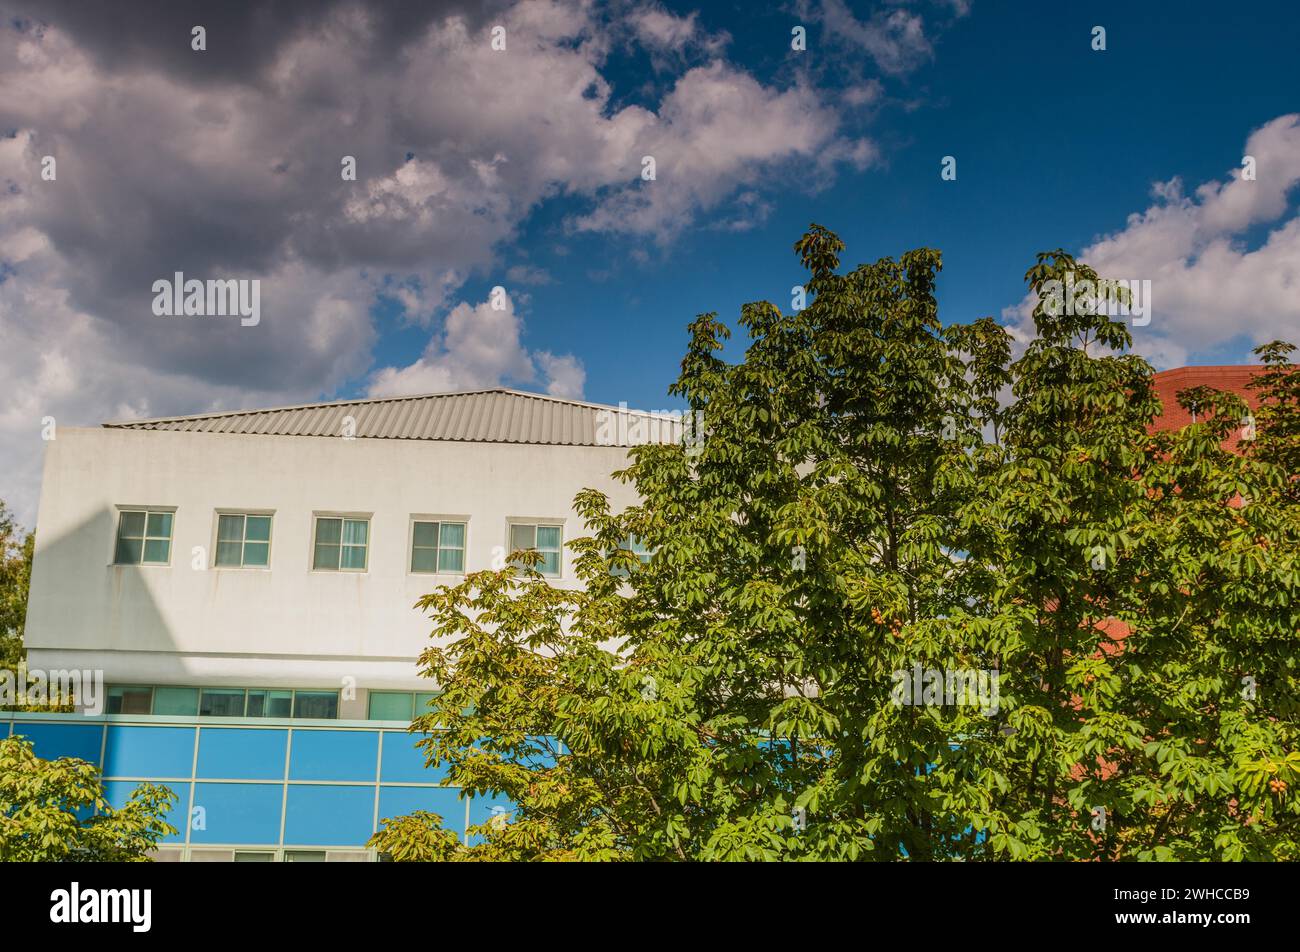 Blue cloudy sky over a large building on a summer day with trees in foreground Stock Photo